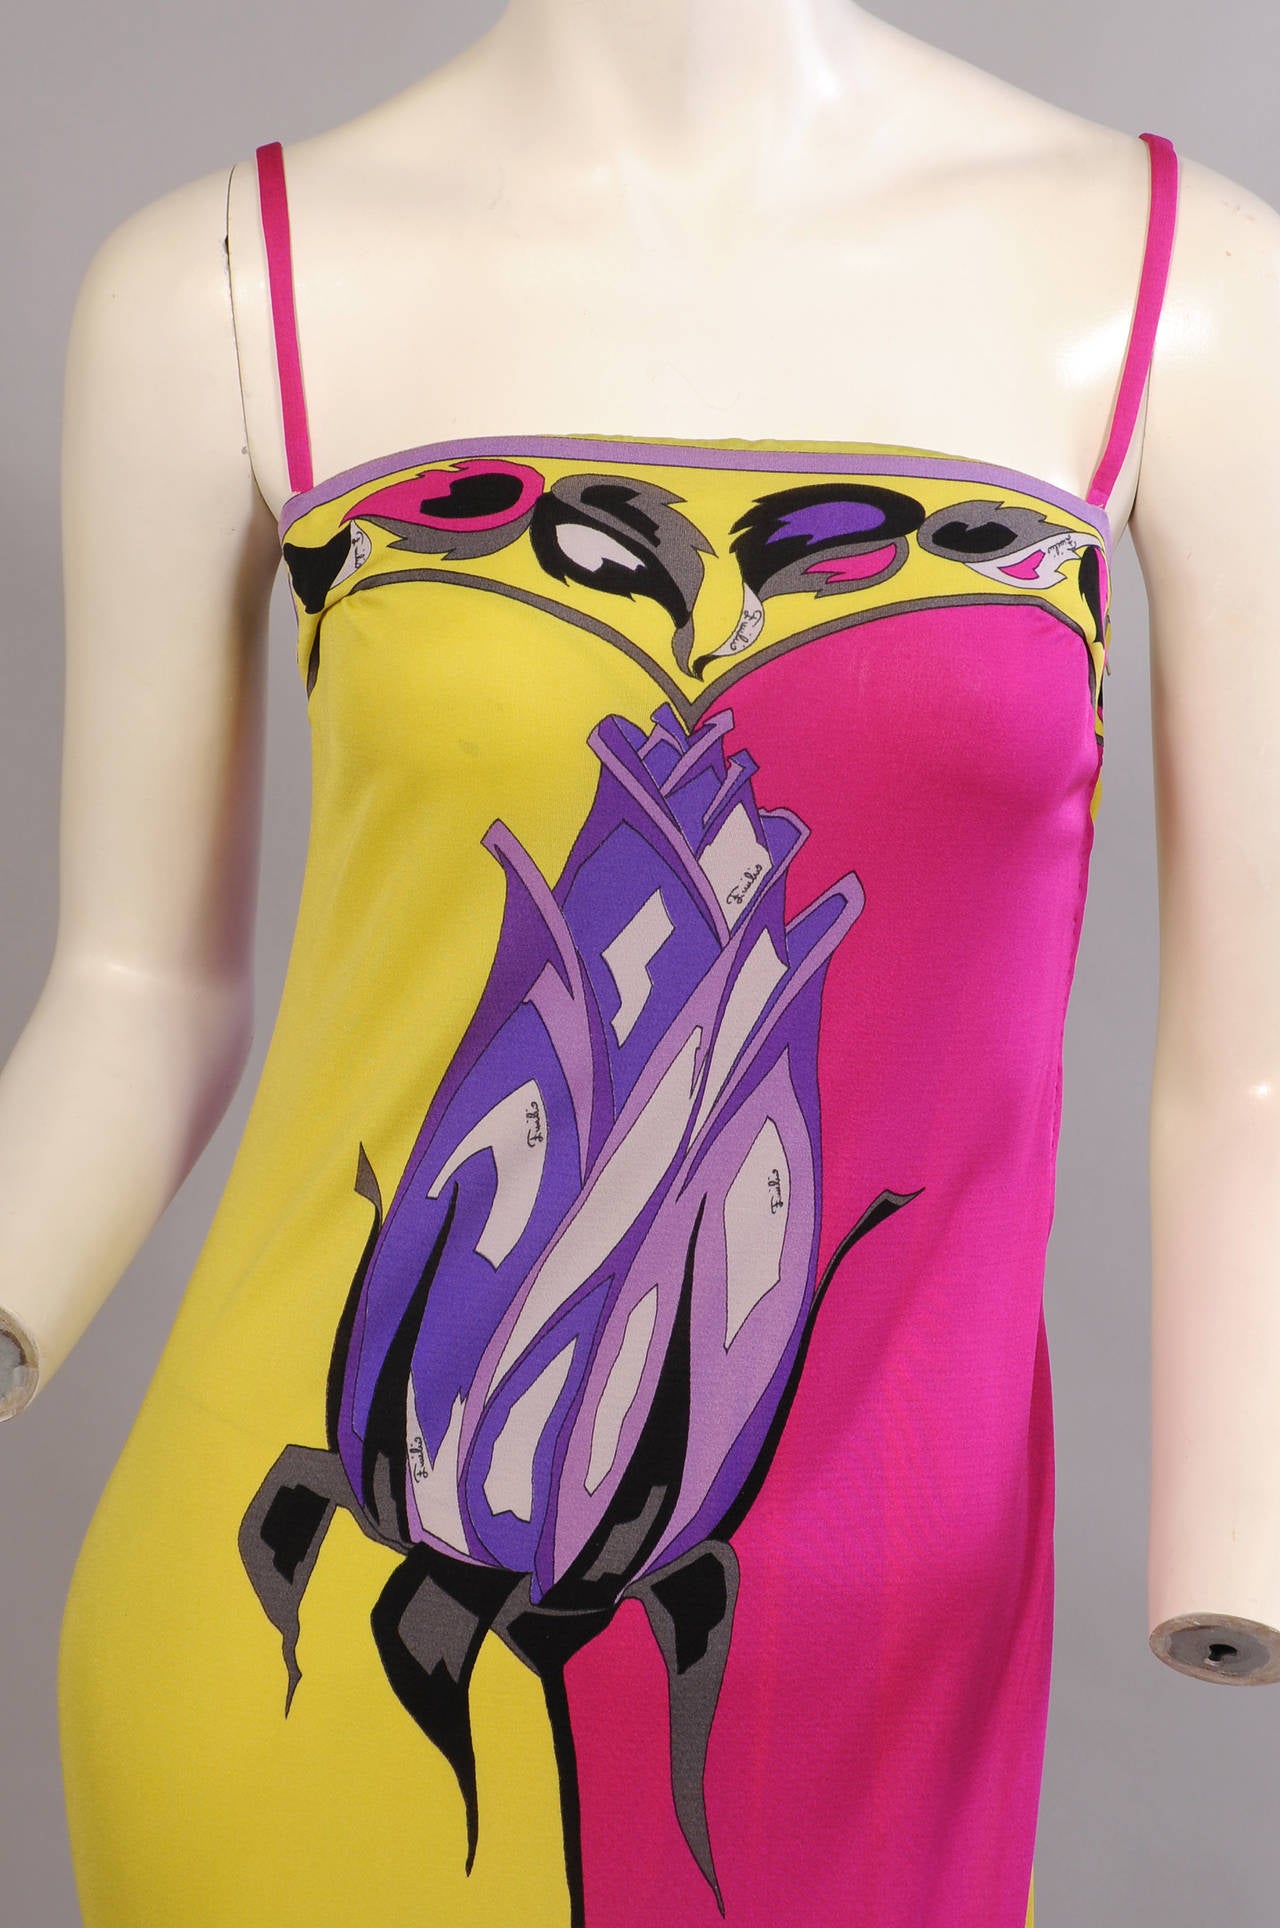 A striking purple long stemmed rose bisects the front and back of this acid yellow and magenta silk jersey dress from the 1970's. A leaf pattern is used on the top and bottom borders. It is marked a vintage size 10, please check the measurements. It